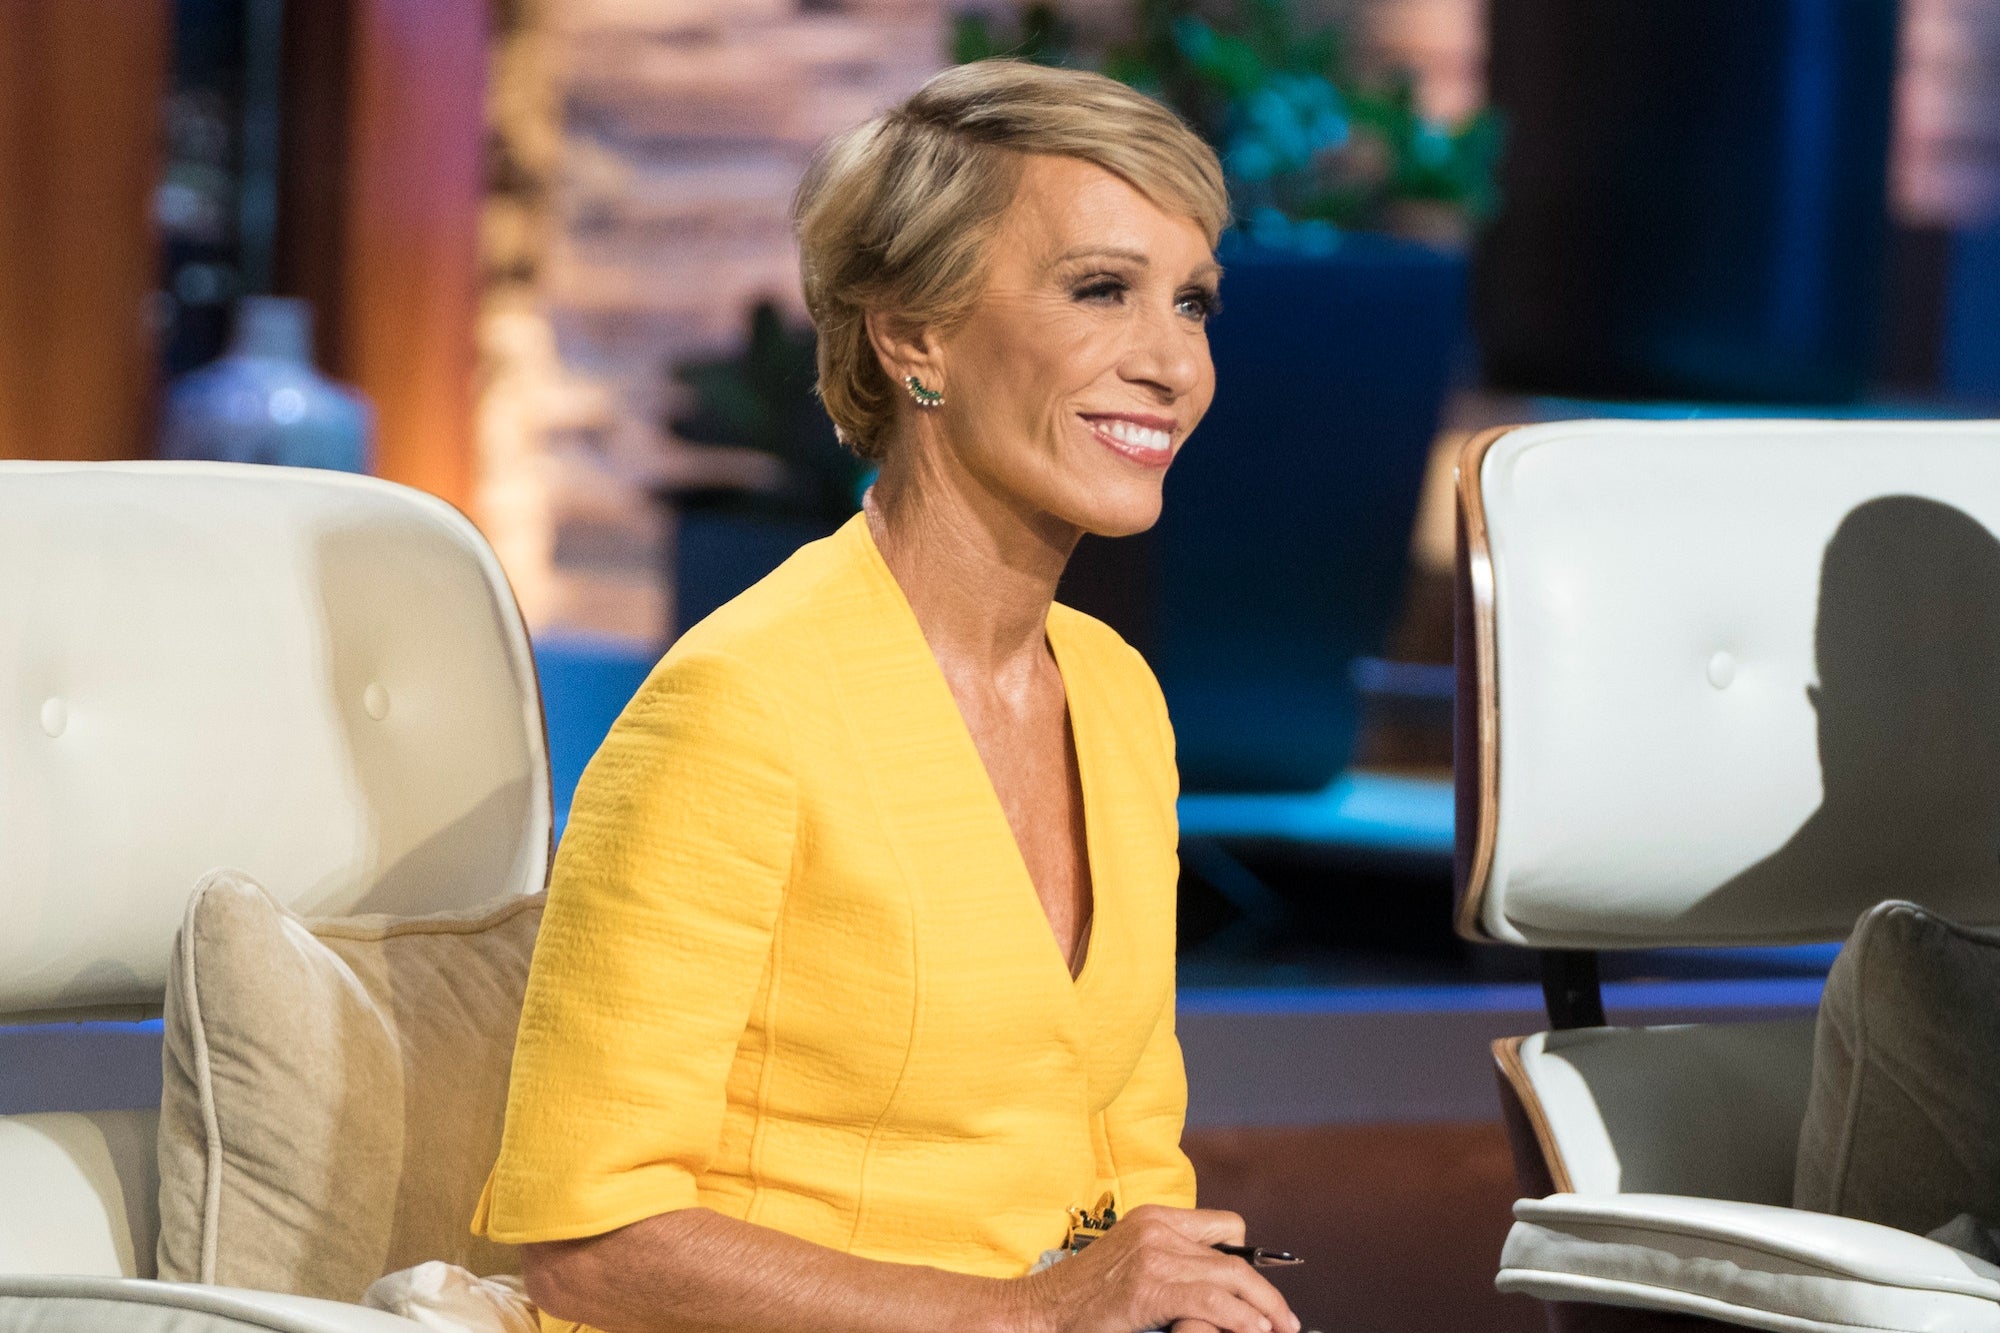 Barbara Corcoran Says All Good Leaders Have This 1 Quality